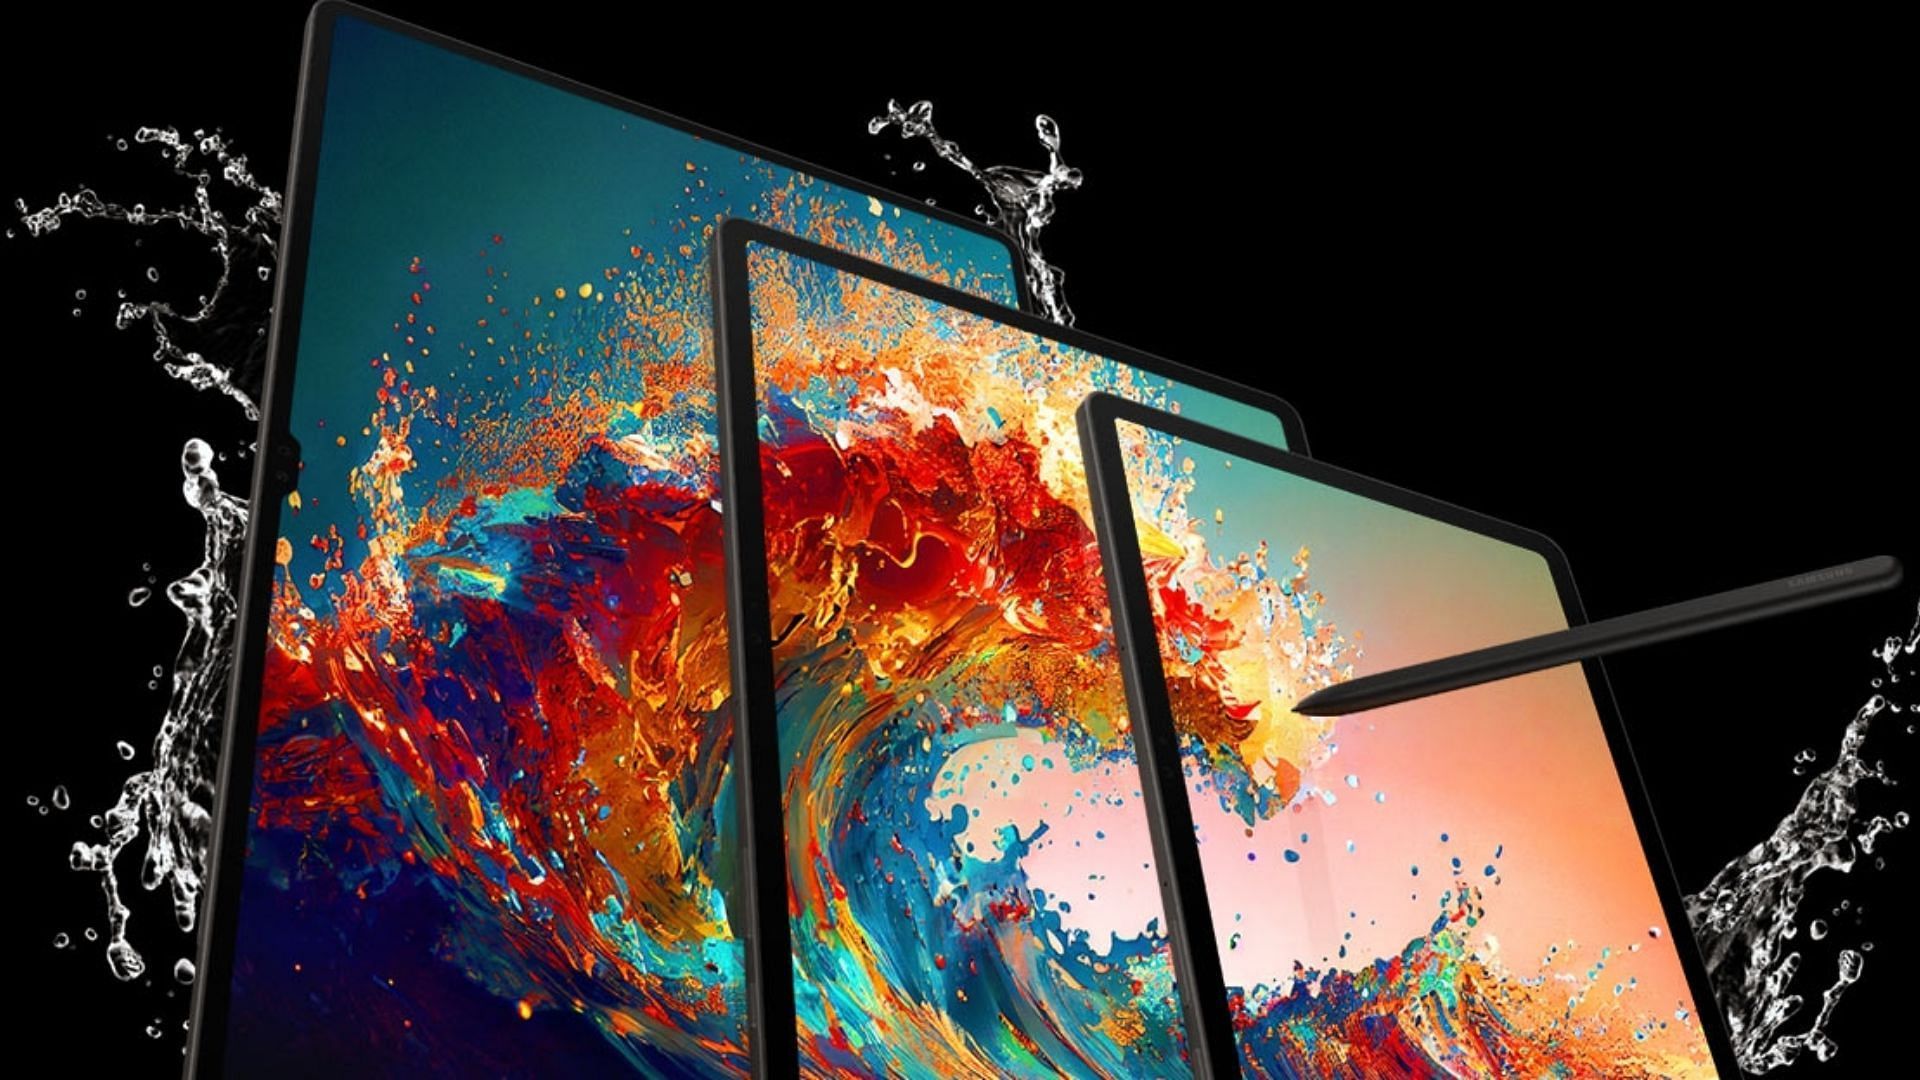 Samsung tablet leads with display quality compared to Apple&#039;s (Image via Samsung)